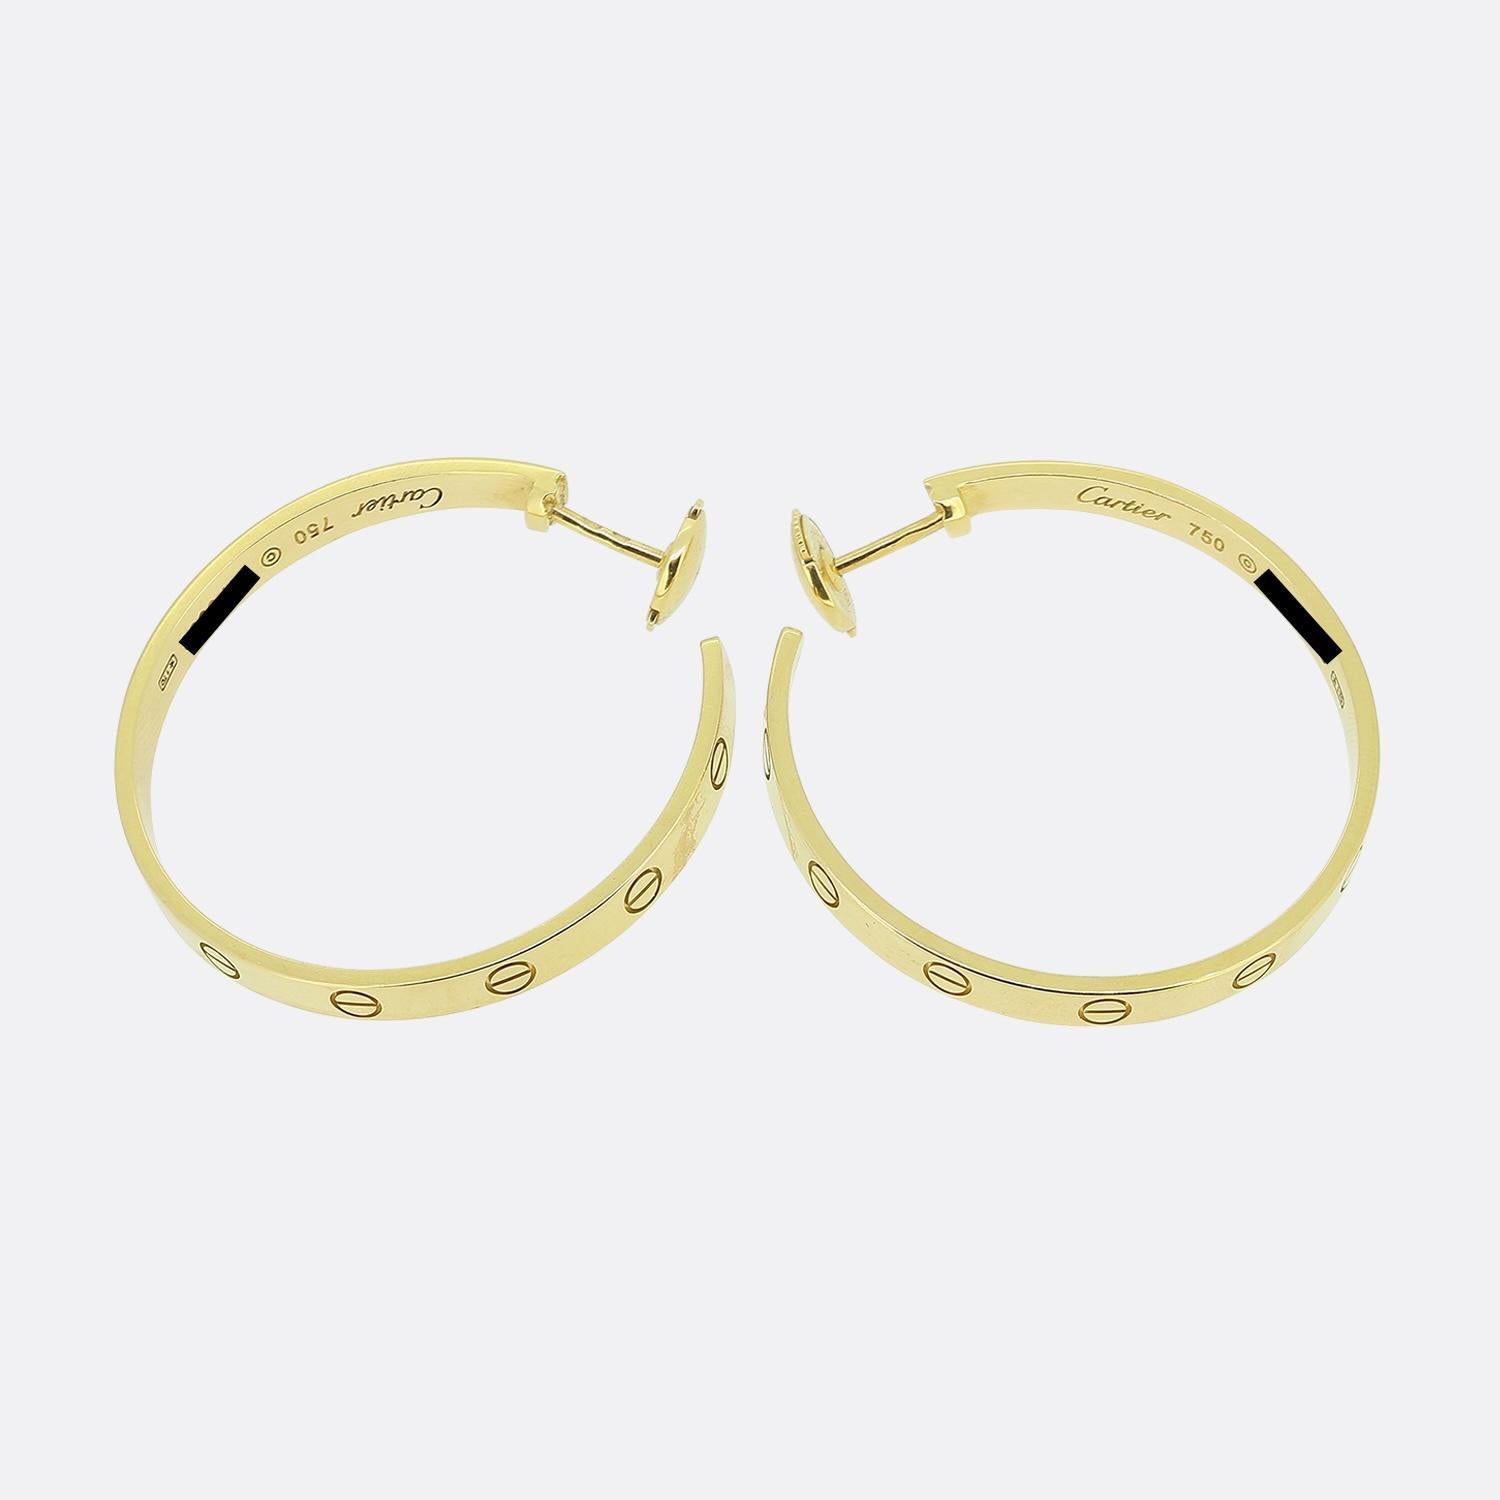 Here we have a wonderful pair of hooped earrings from the world renowned luxury jewellery house of Cartier. Collectively these identical pieces form part of their LOVE collection and have been crafted from 18ct yellow gold with the outer edge